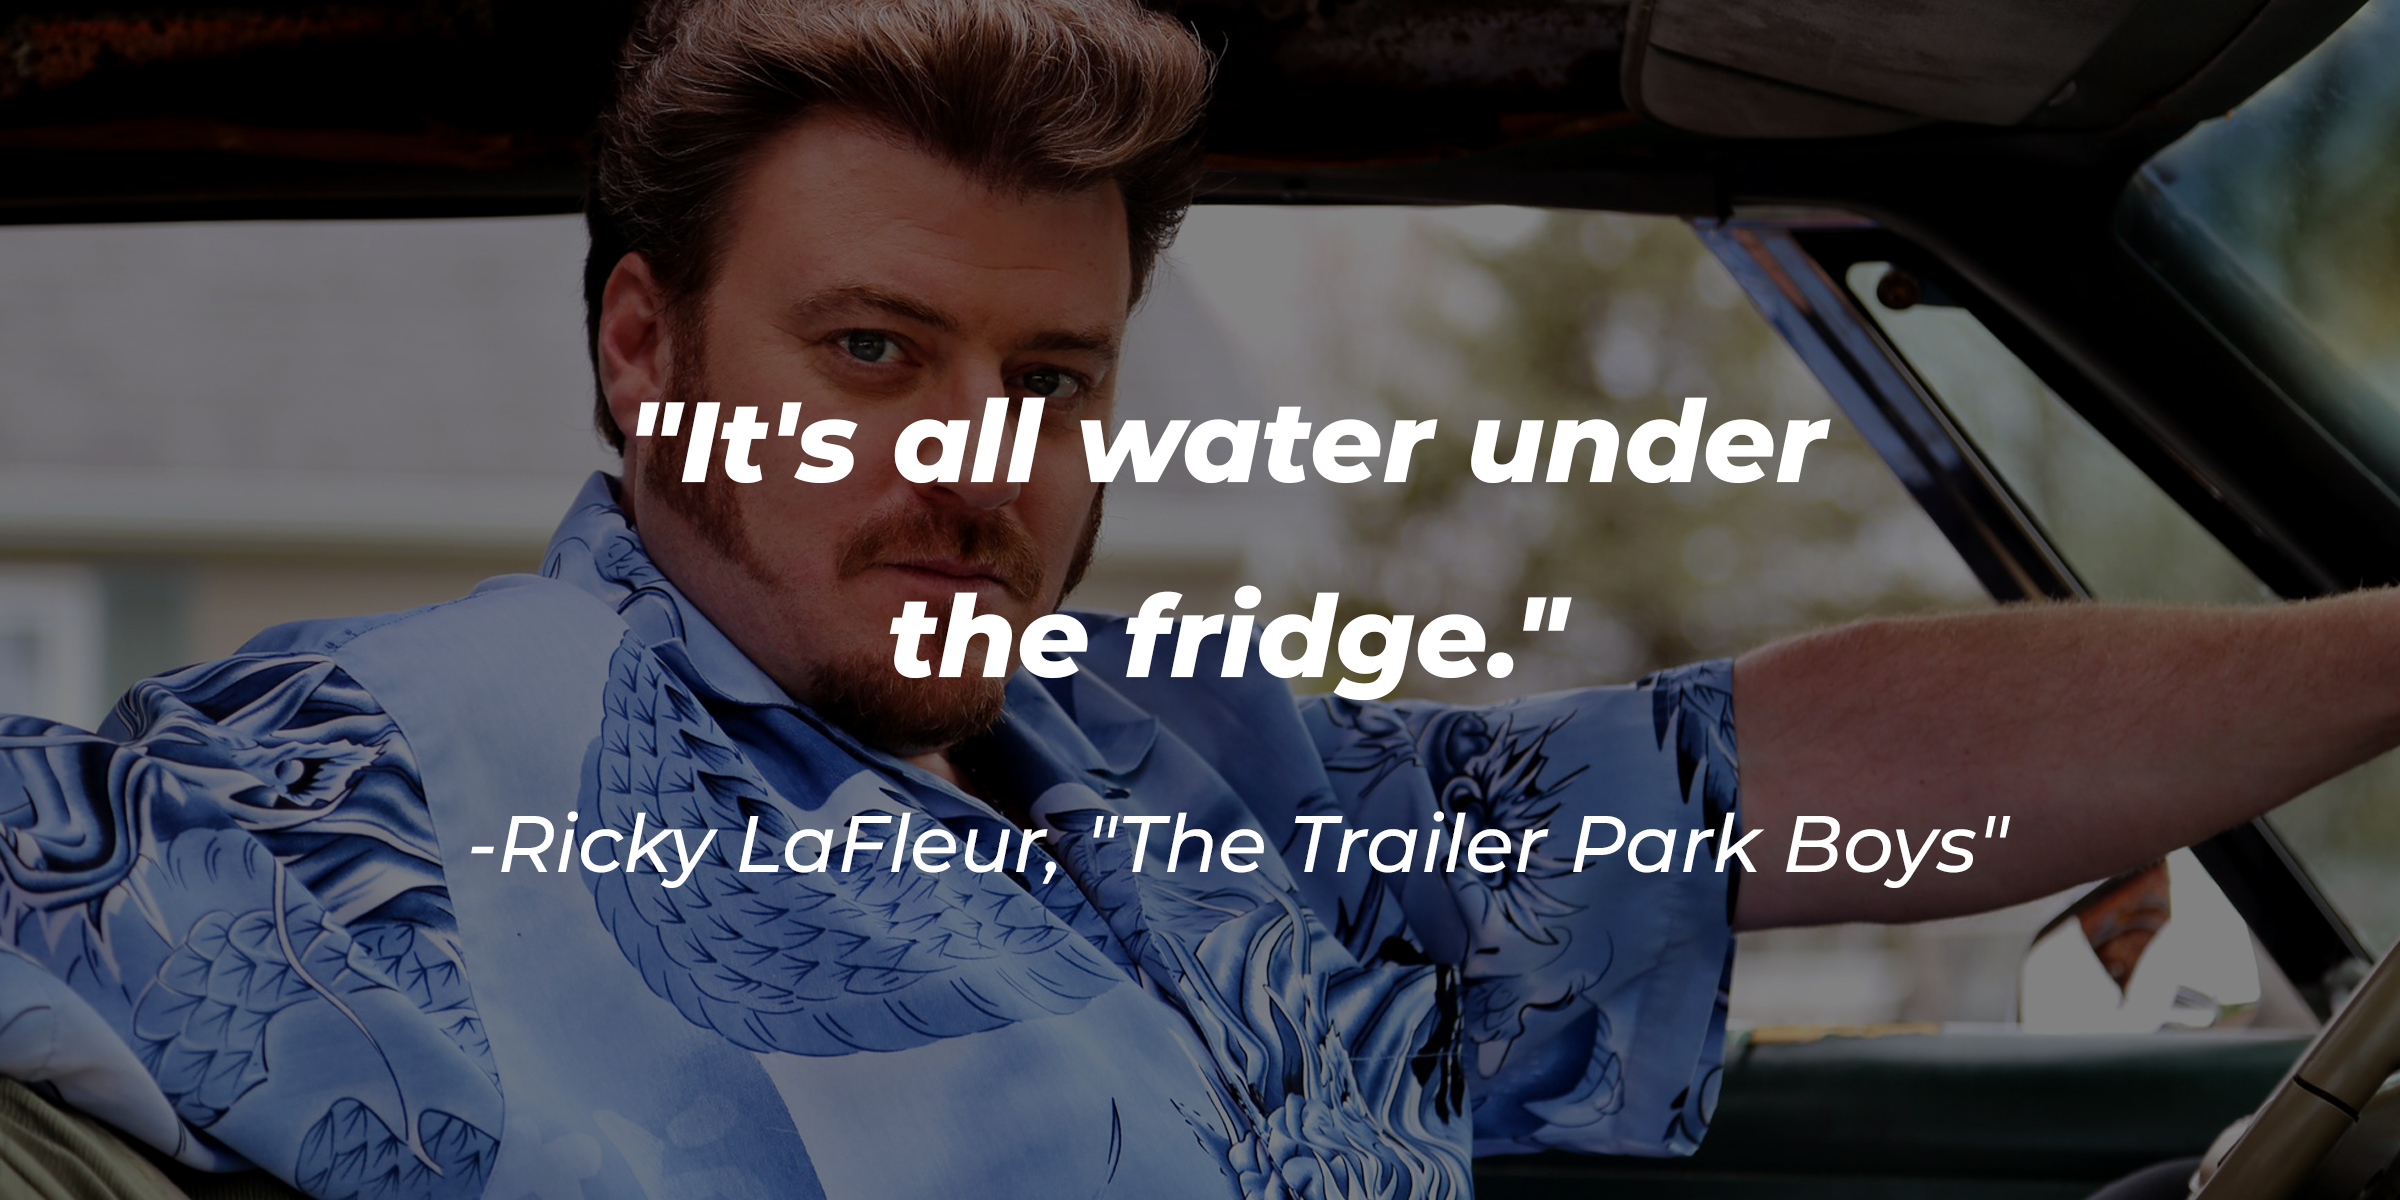 Ricky LaFleur with his quote: "It's all water under the fridge." | Source: Facebook.com/trailerparkboys